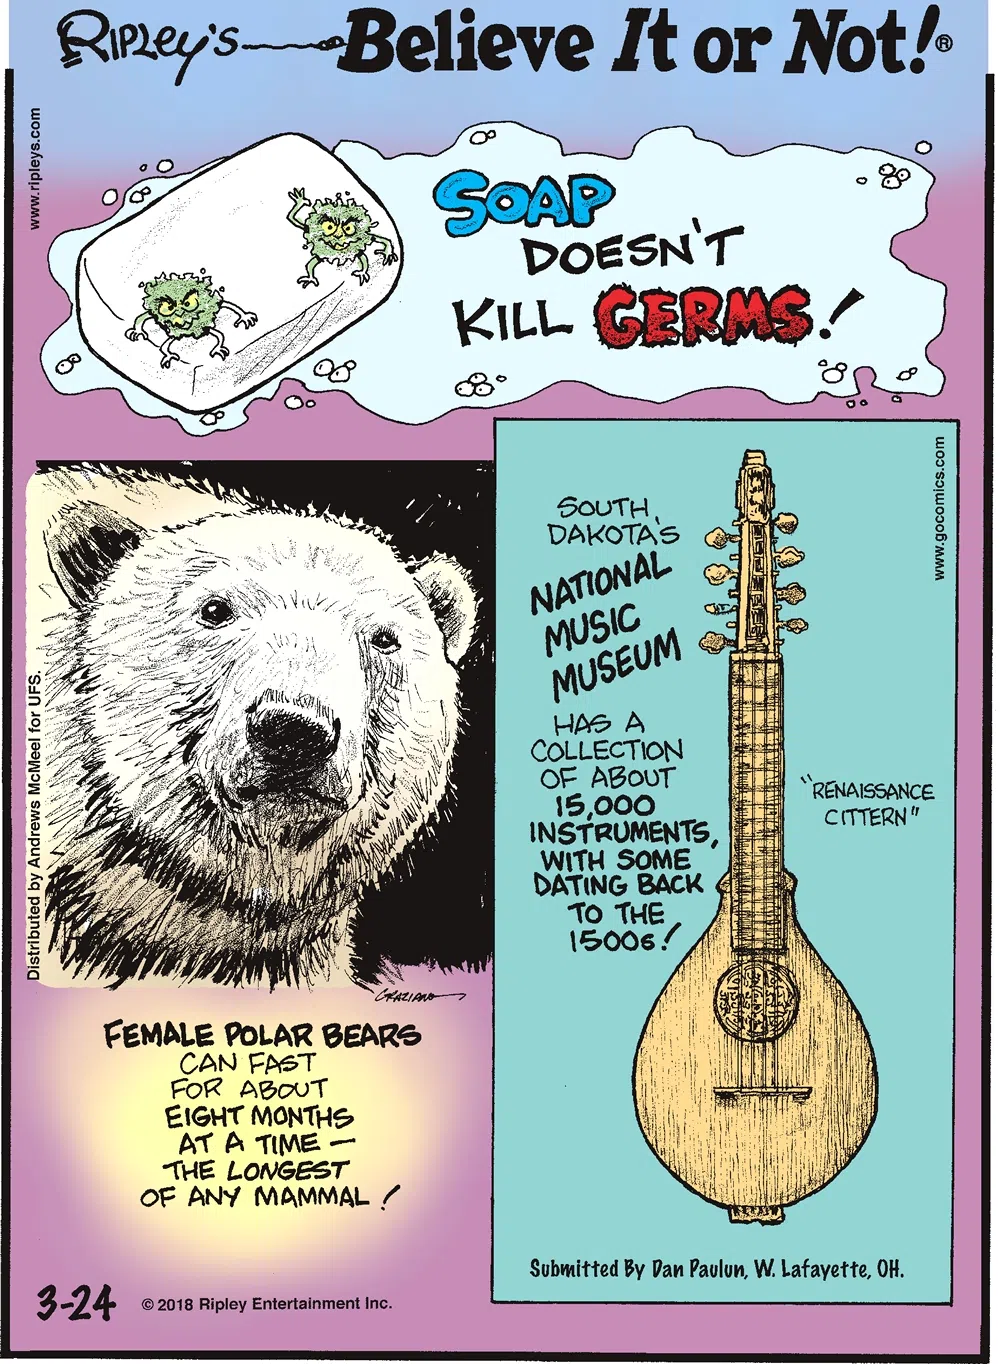 Soap doesn't kill germs!-------------------- Female polar bears can fast for about eight months at a time - the longest of any mammal!-------------------- South Dakota's National Music Museum has a collection of about 15,000 instruments, with some dating back to the 1500s!